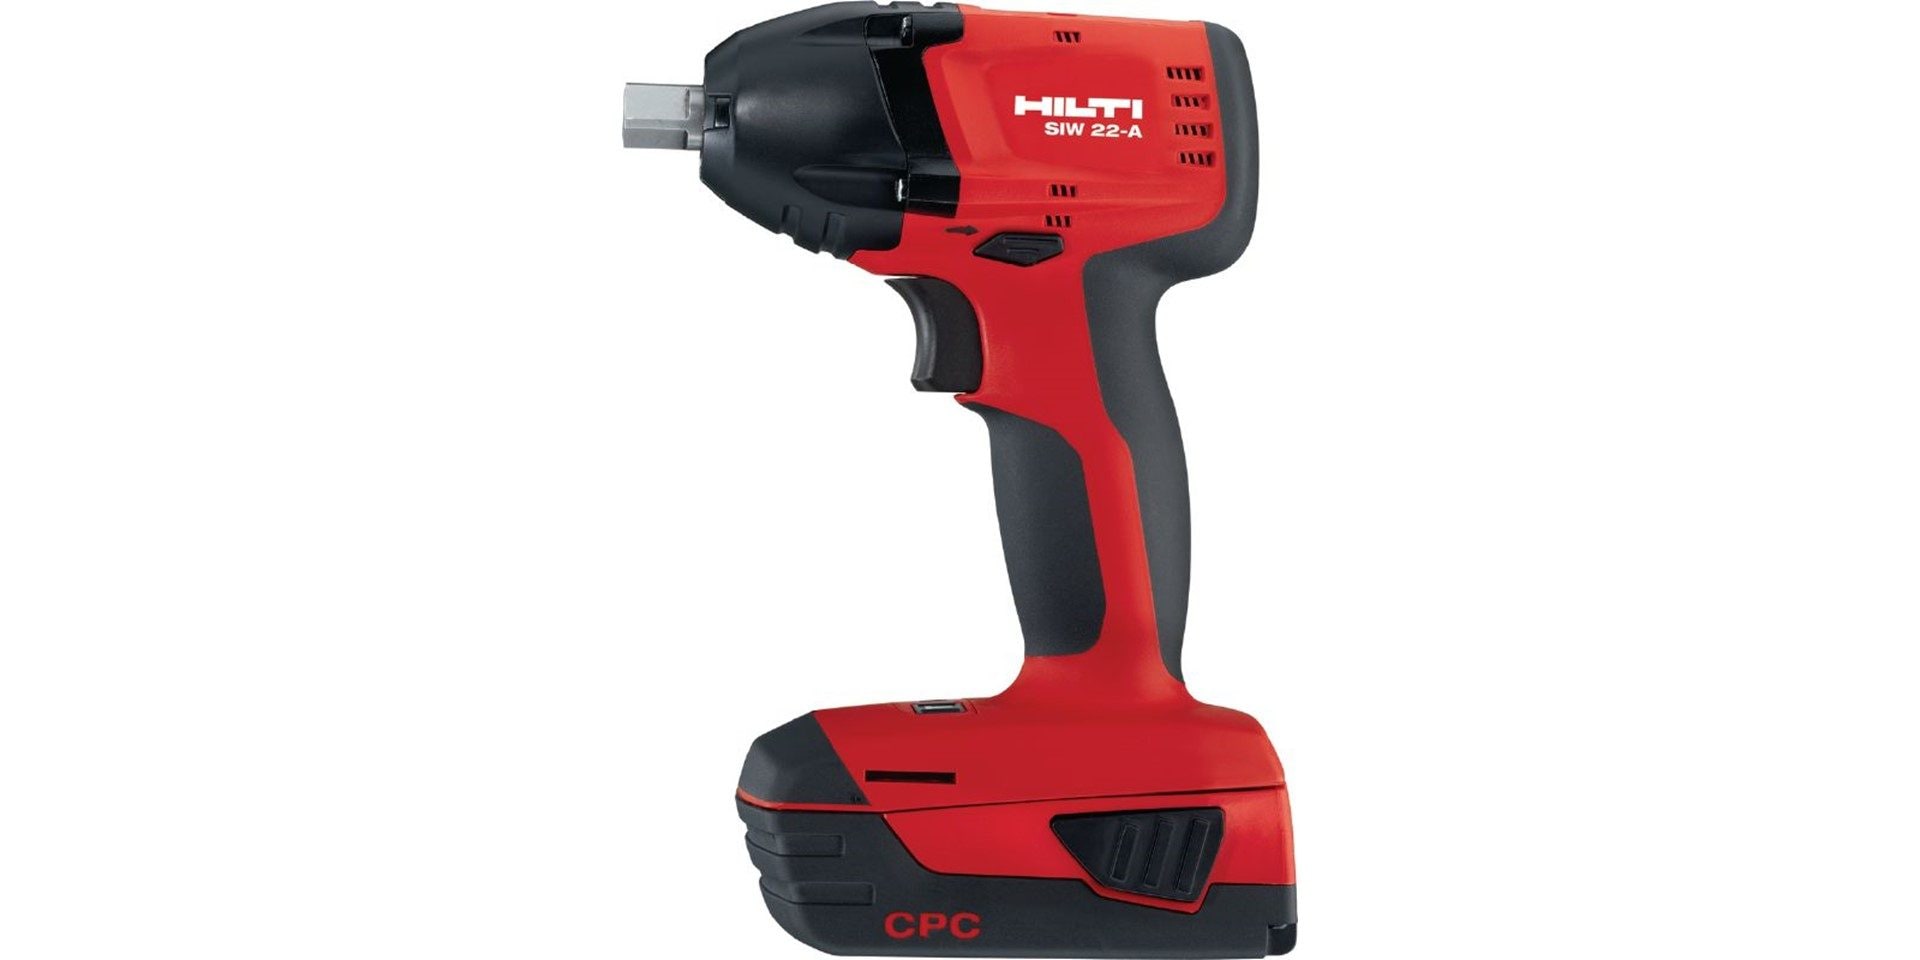 Cordless Impact Wrench SIW 22-A